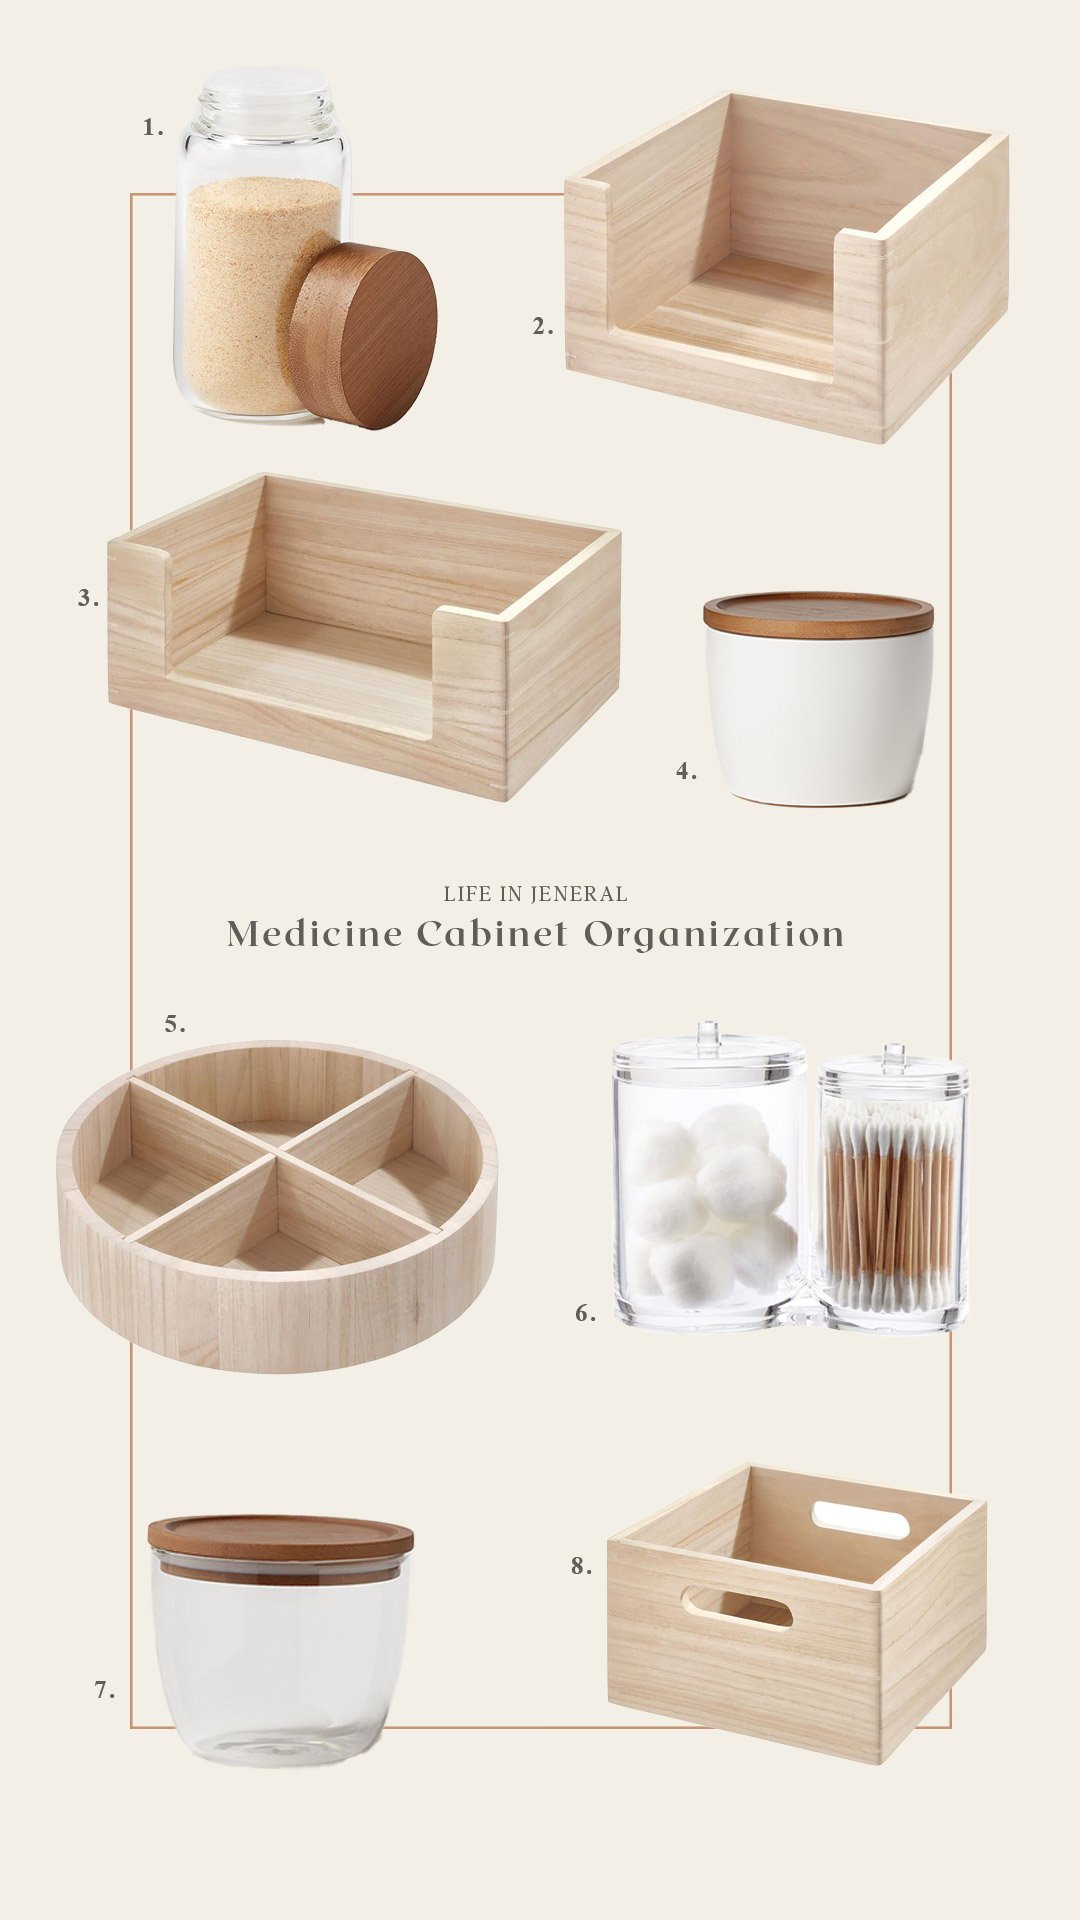 reSPACEd - I've organized a lot of medicine cabinets in my time as an  organizer, and I can honestly say that organizing them this way makes it  easiest to find what you